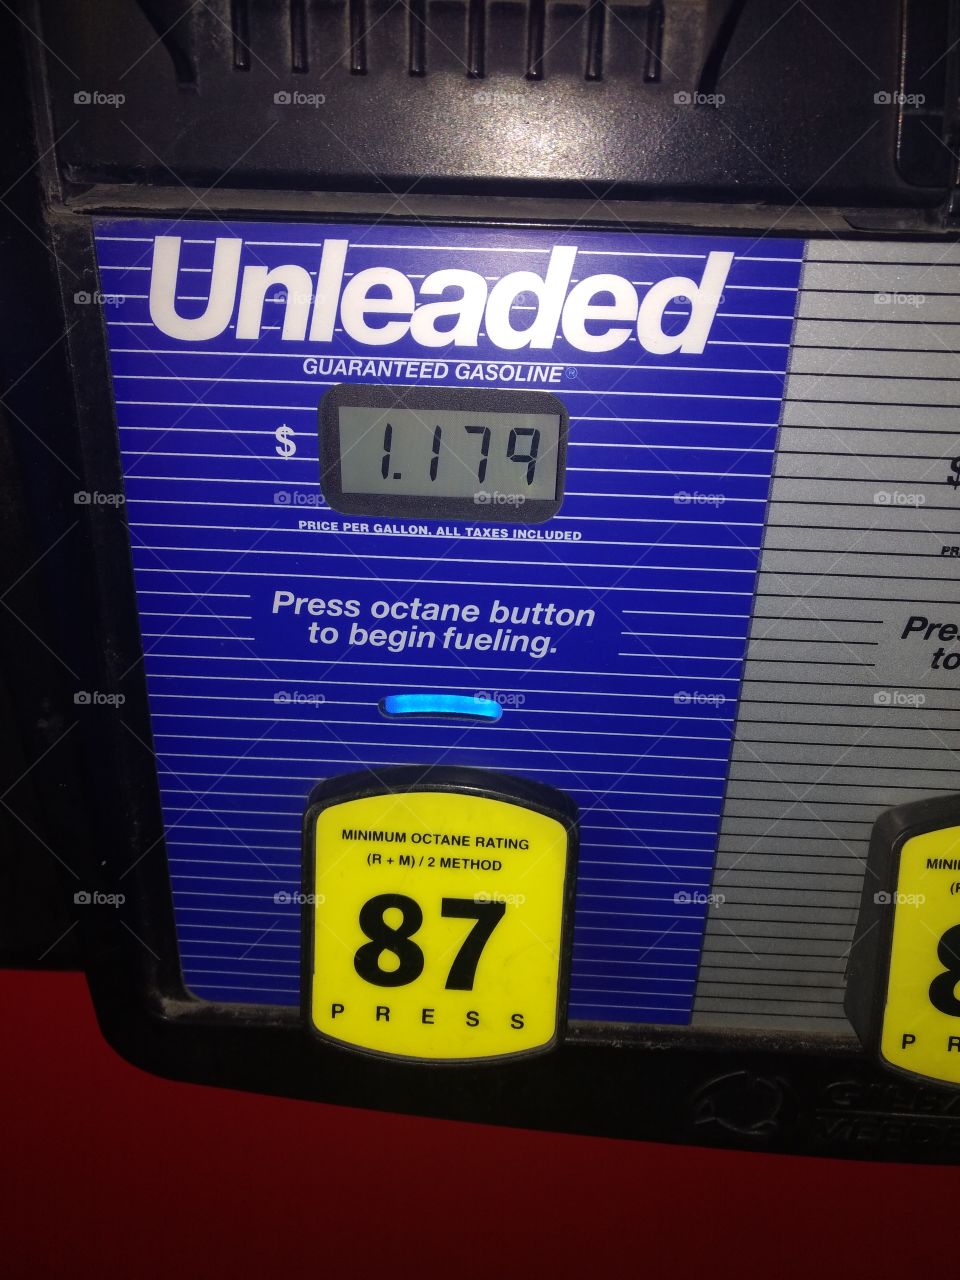 That's what I'm talking about! Thanks Price Chopper and QT for your discount program!!!